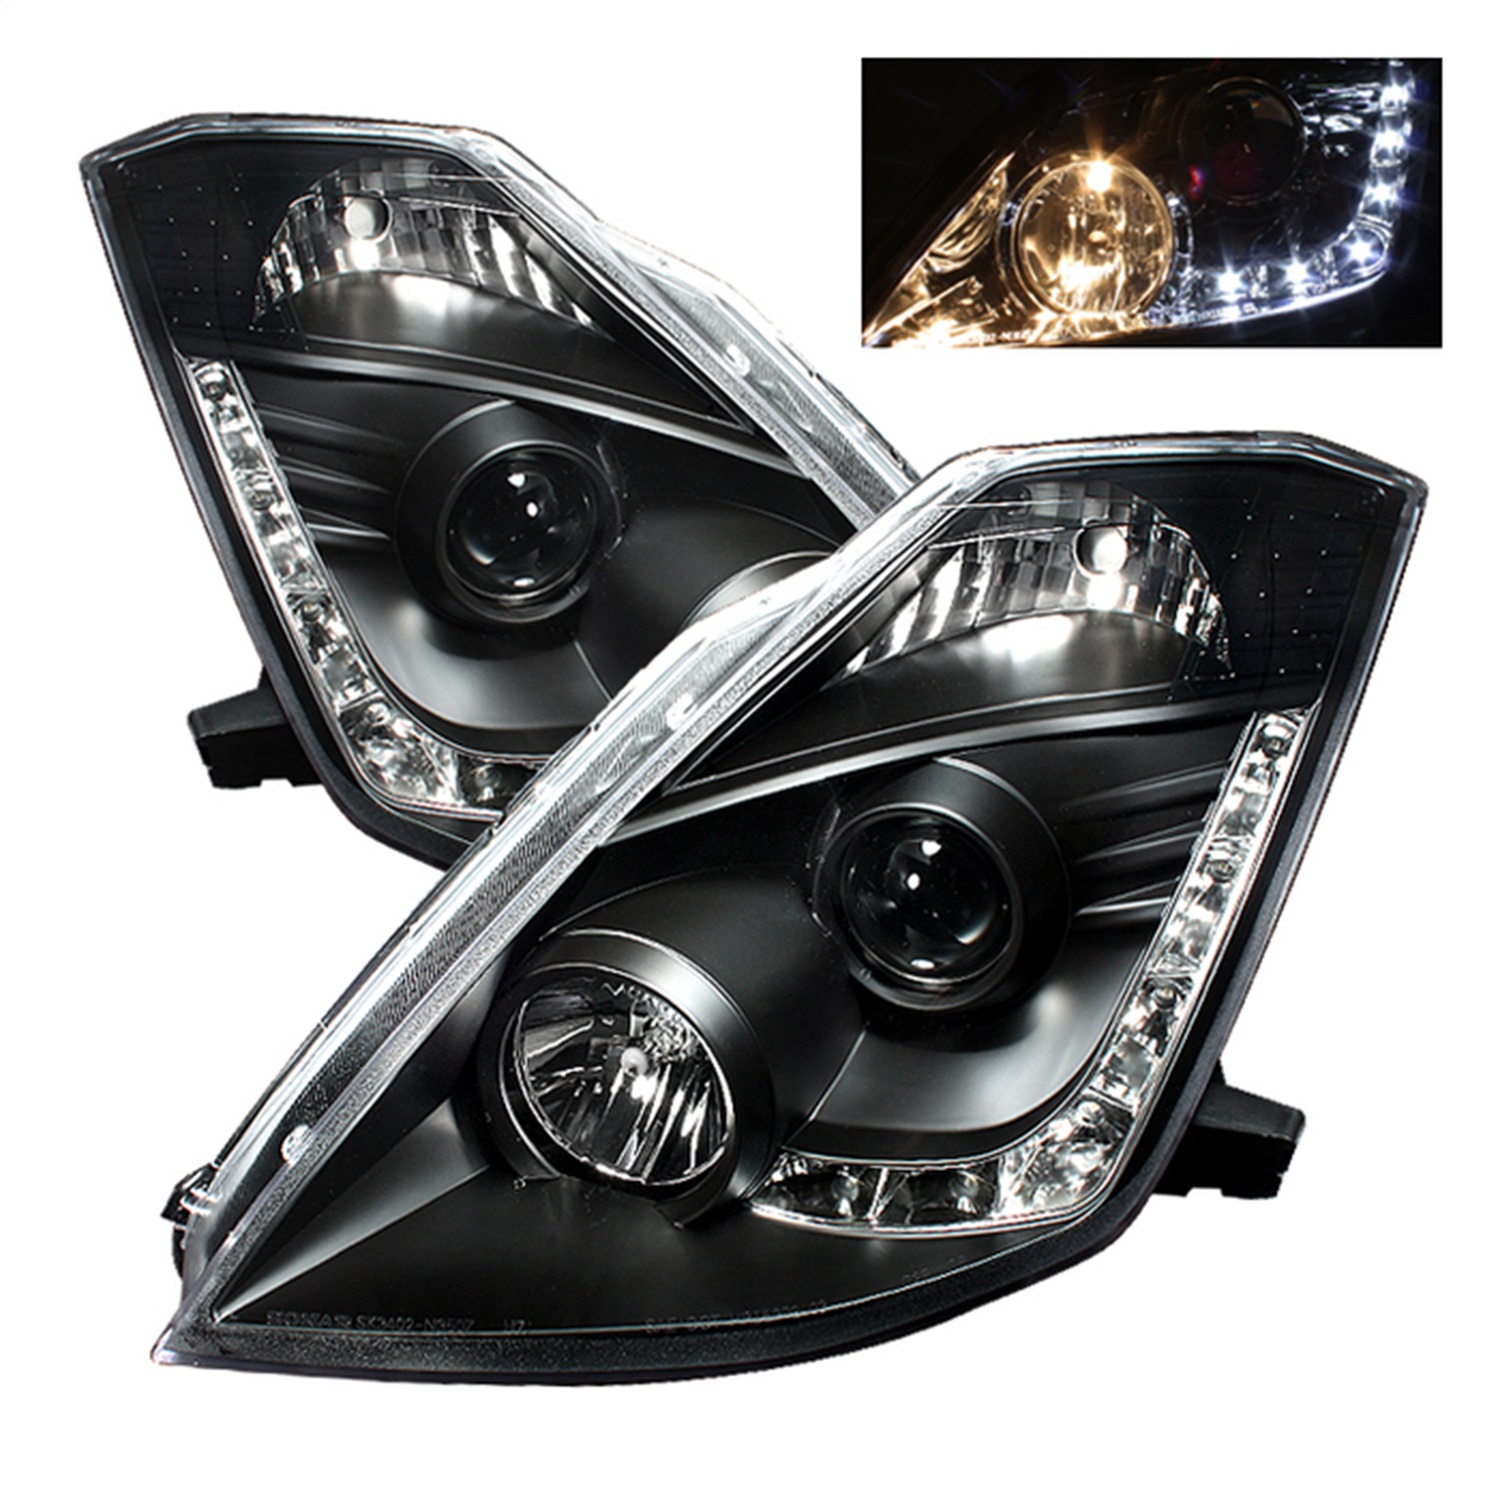 Spyder Auto 5064738 DRL LED Projector Headlights Fits 03-05 350Z